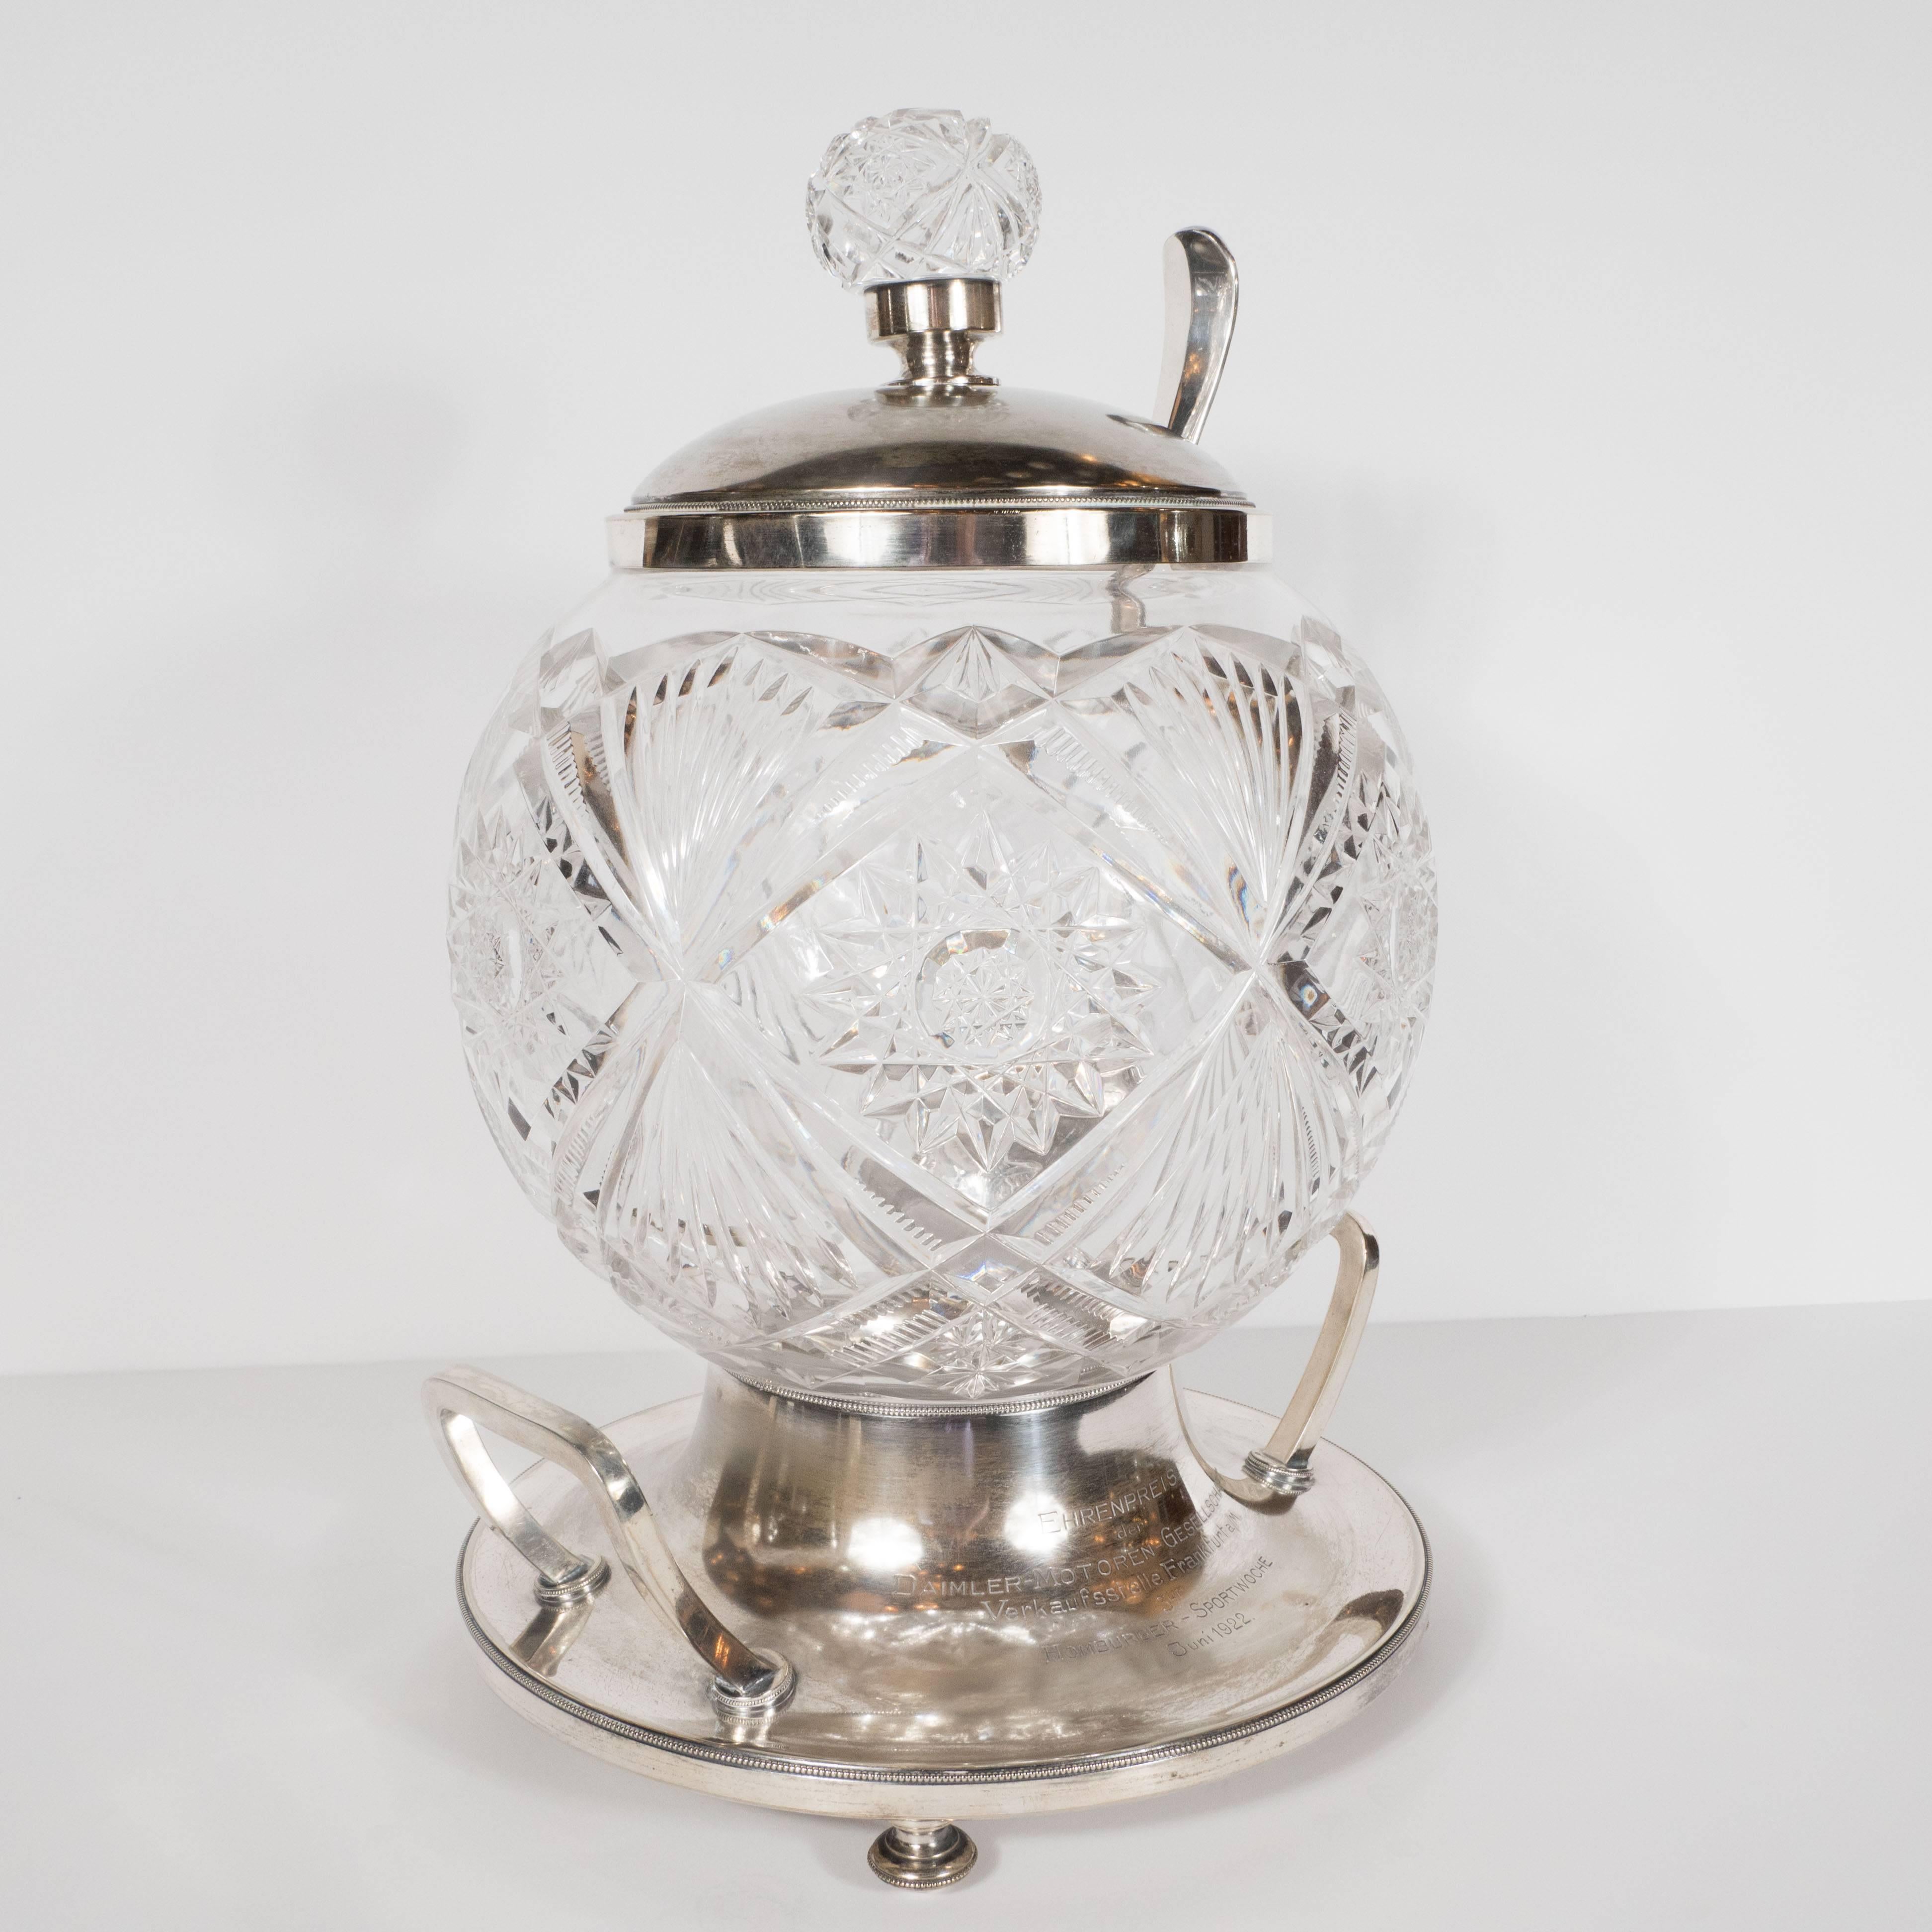 This exquisite punch bowl was realized in cut crystal and silver plate for the Daimler Motor Company in June of 1922. It embodies the superlative craftsmanship rarely seen today in its elaborate starburst and geometric patterns etched throughout and